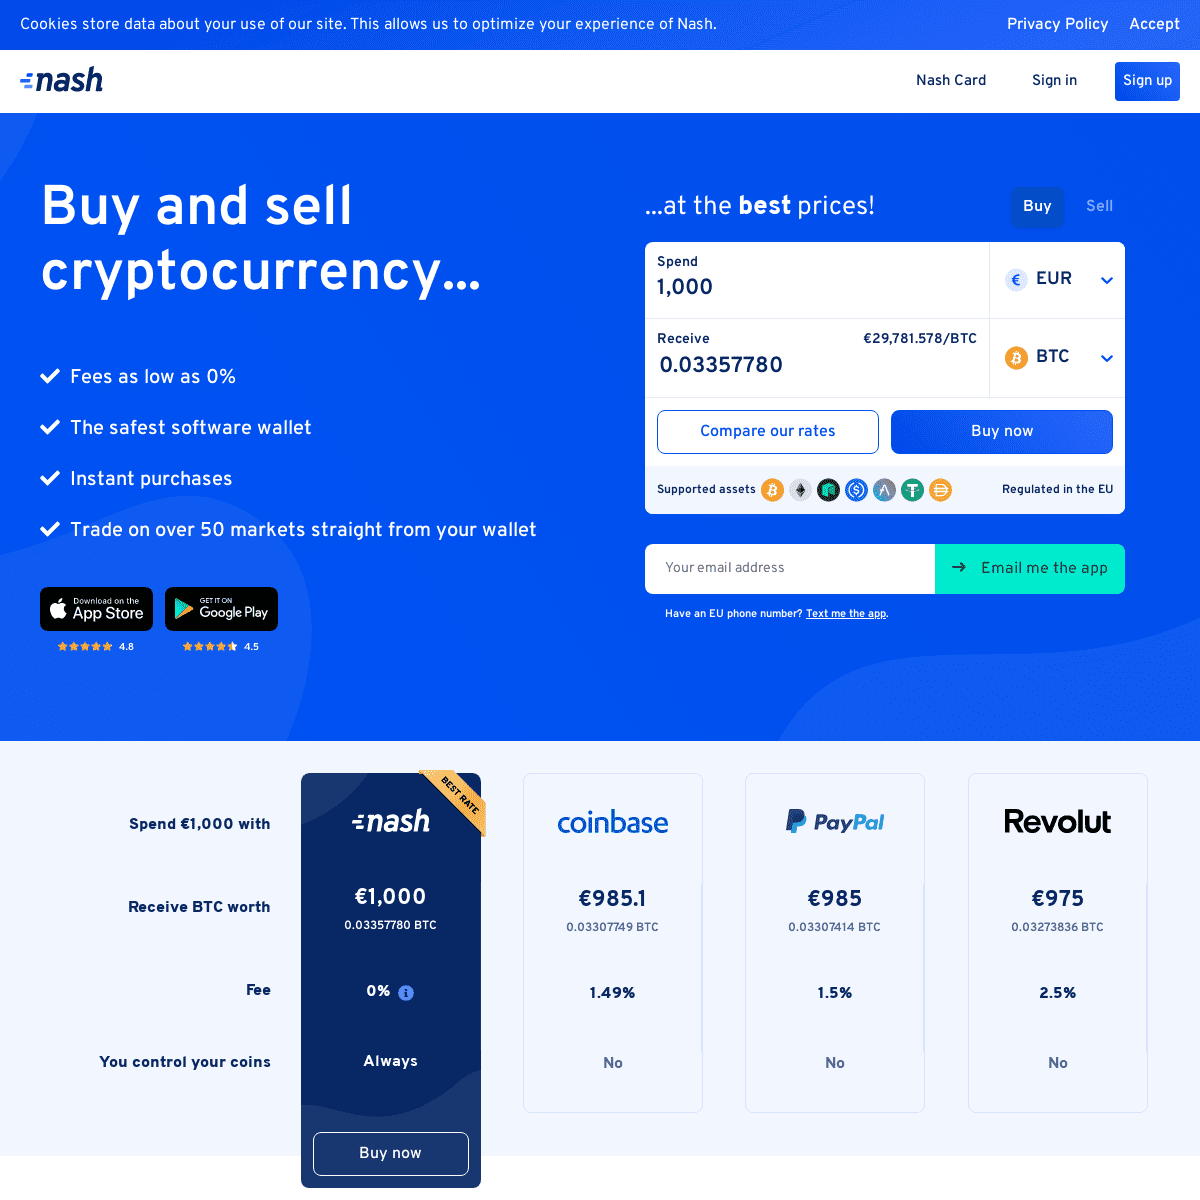 A complete backup of https://nash.io